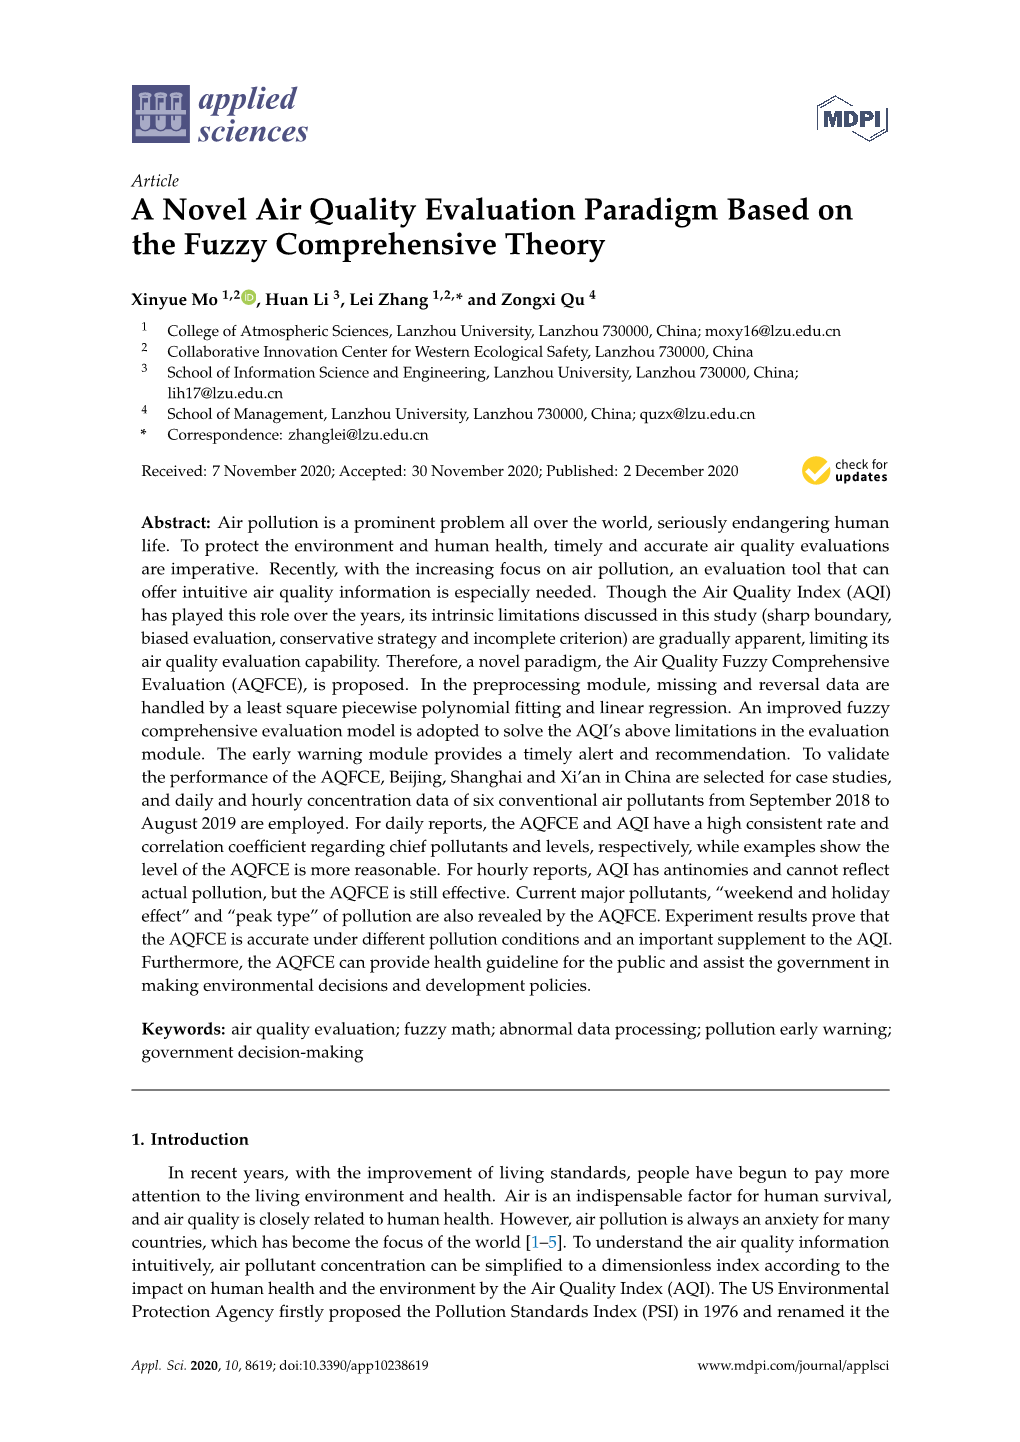 A Novel Air Quality Evaluation Paradigm Based on the Fuzzy Comprehensive Theory